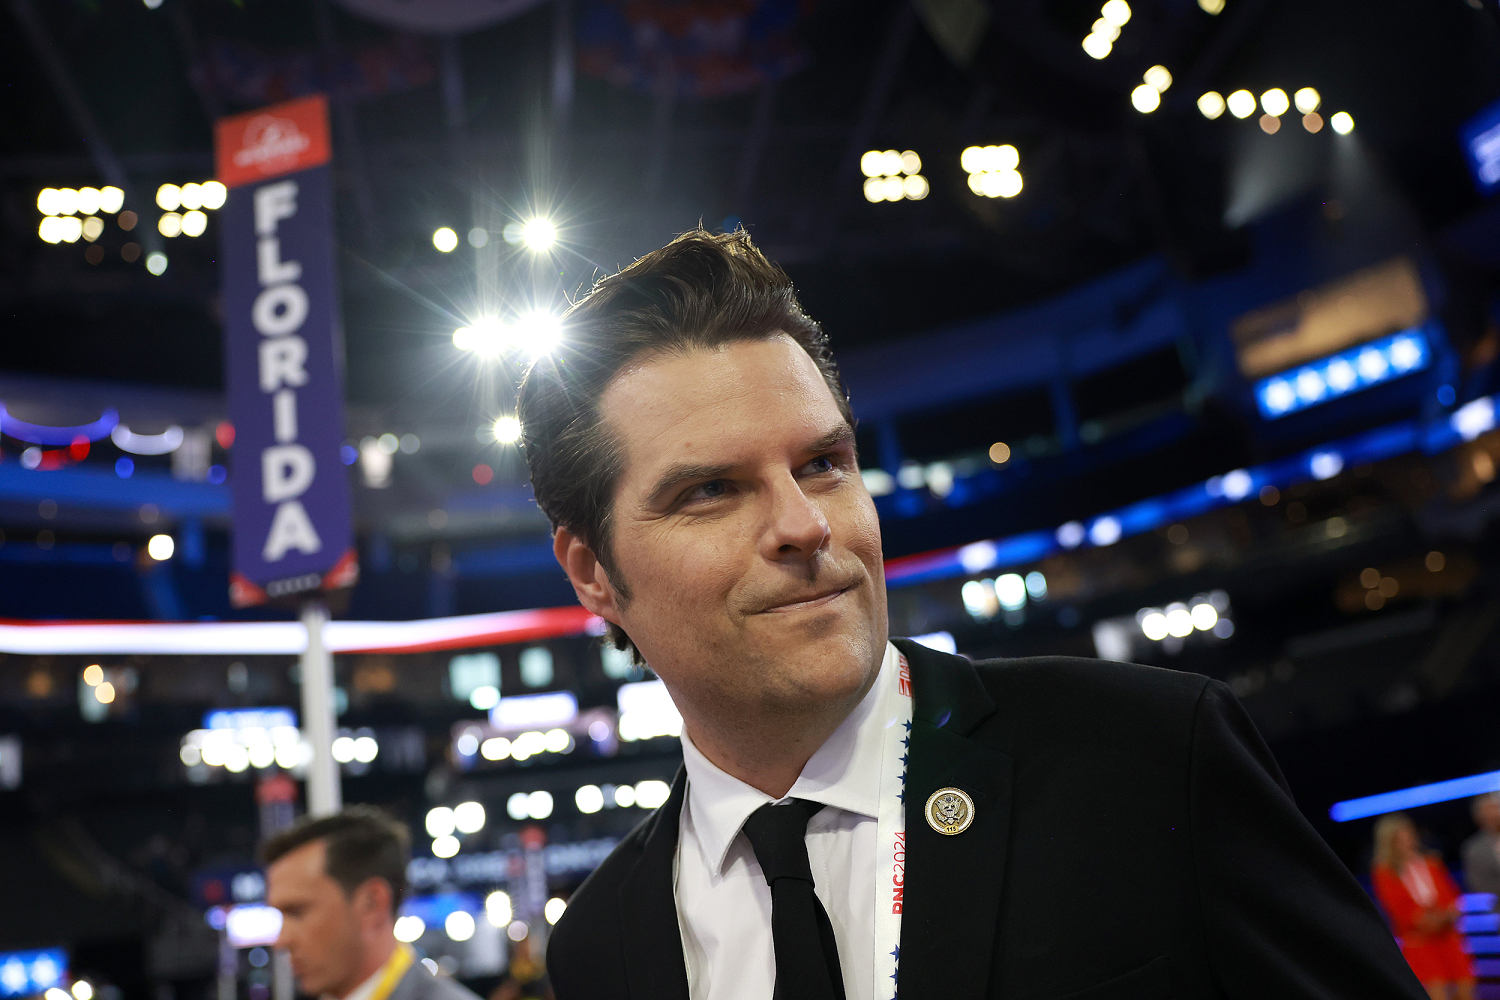 Matt Gaetz and Kevin McCarthy’s feud flares up at the RNC